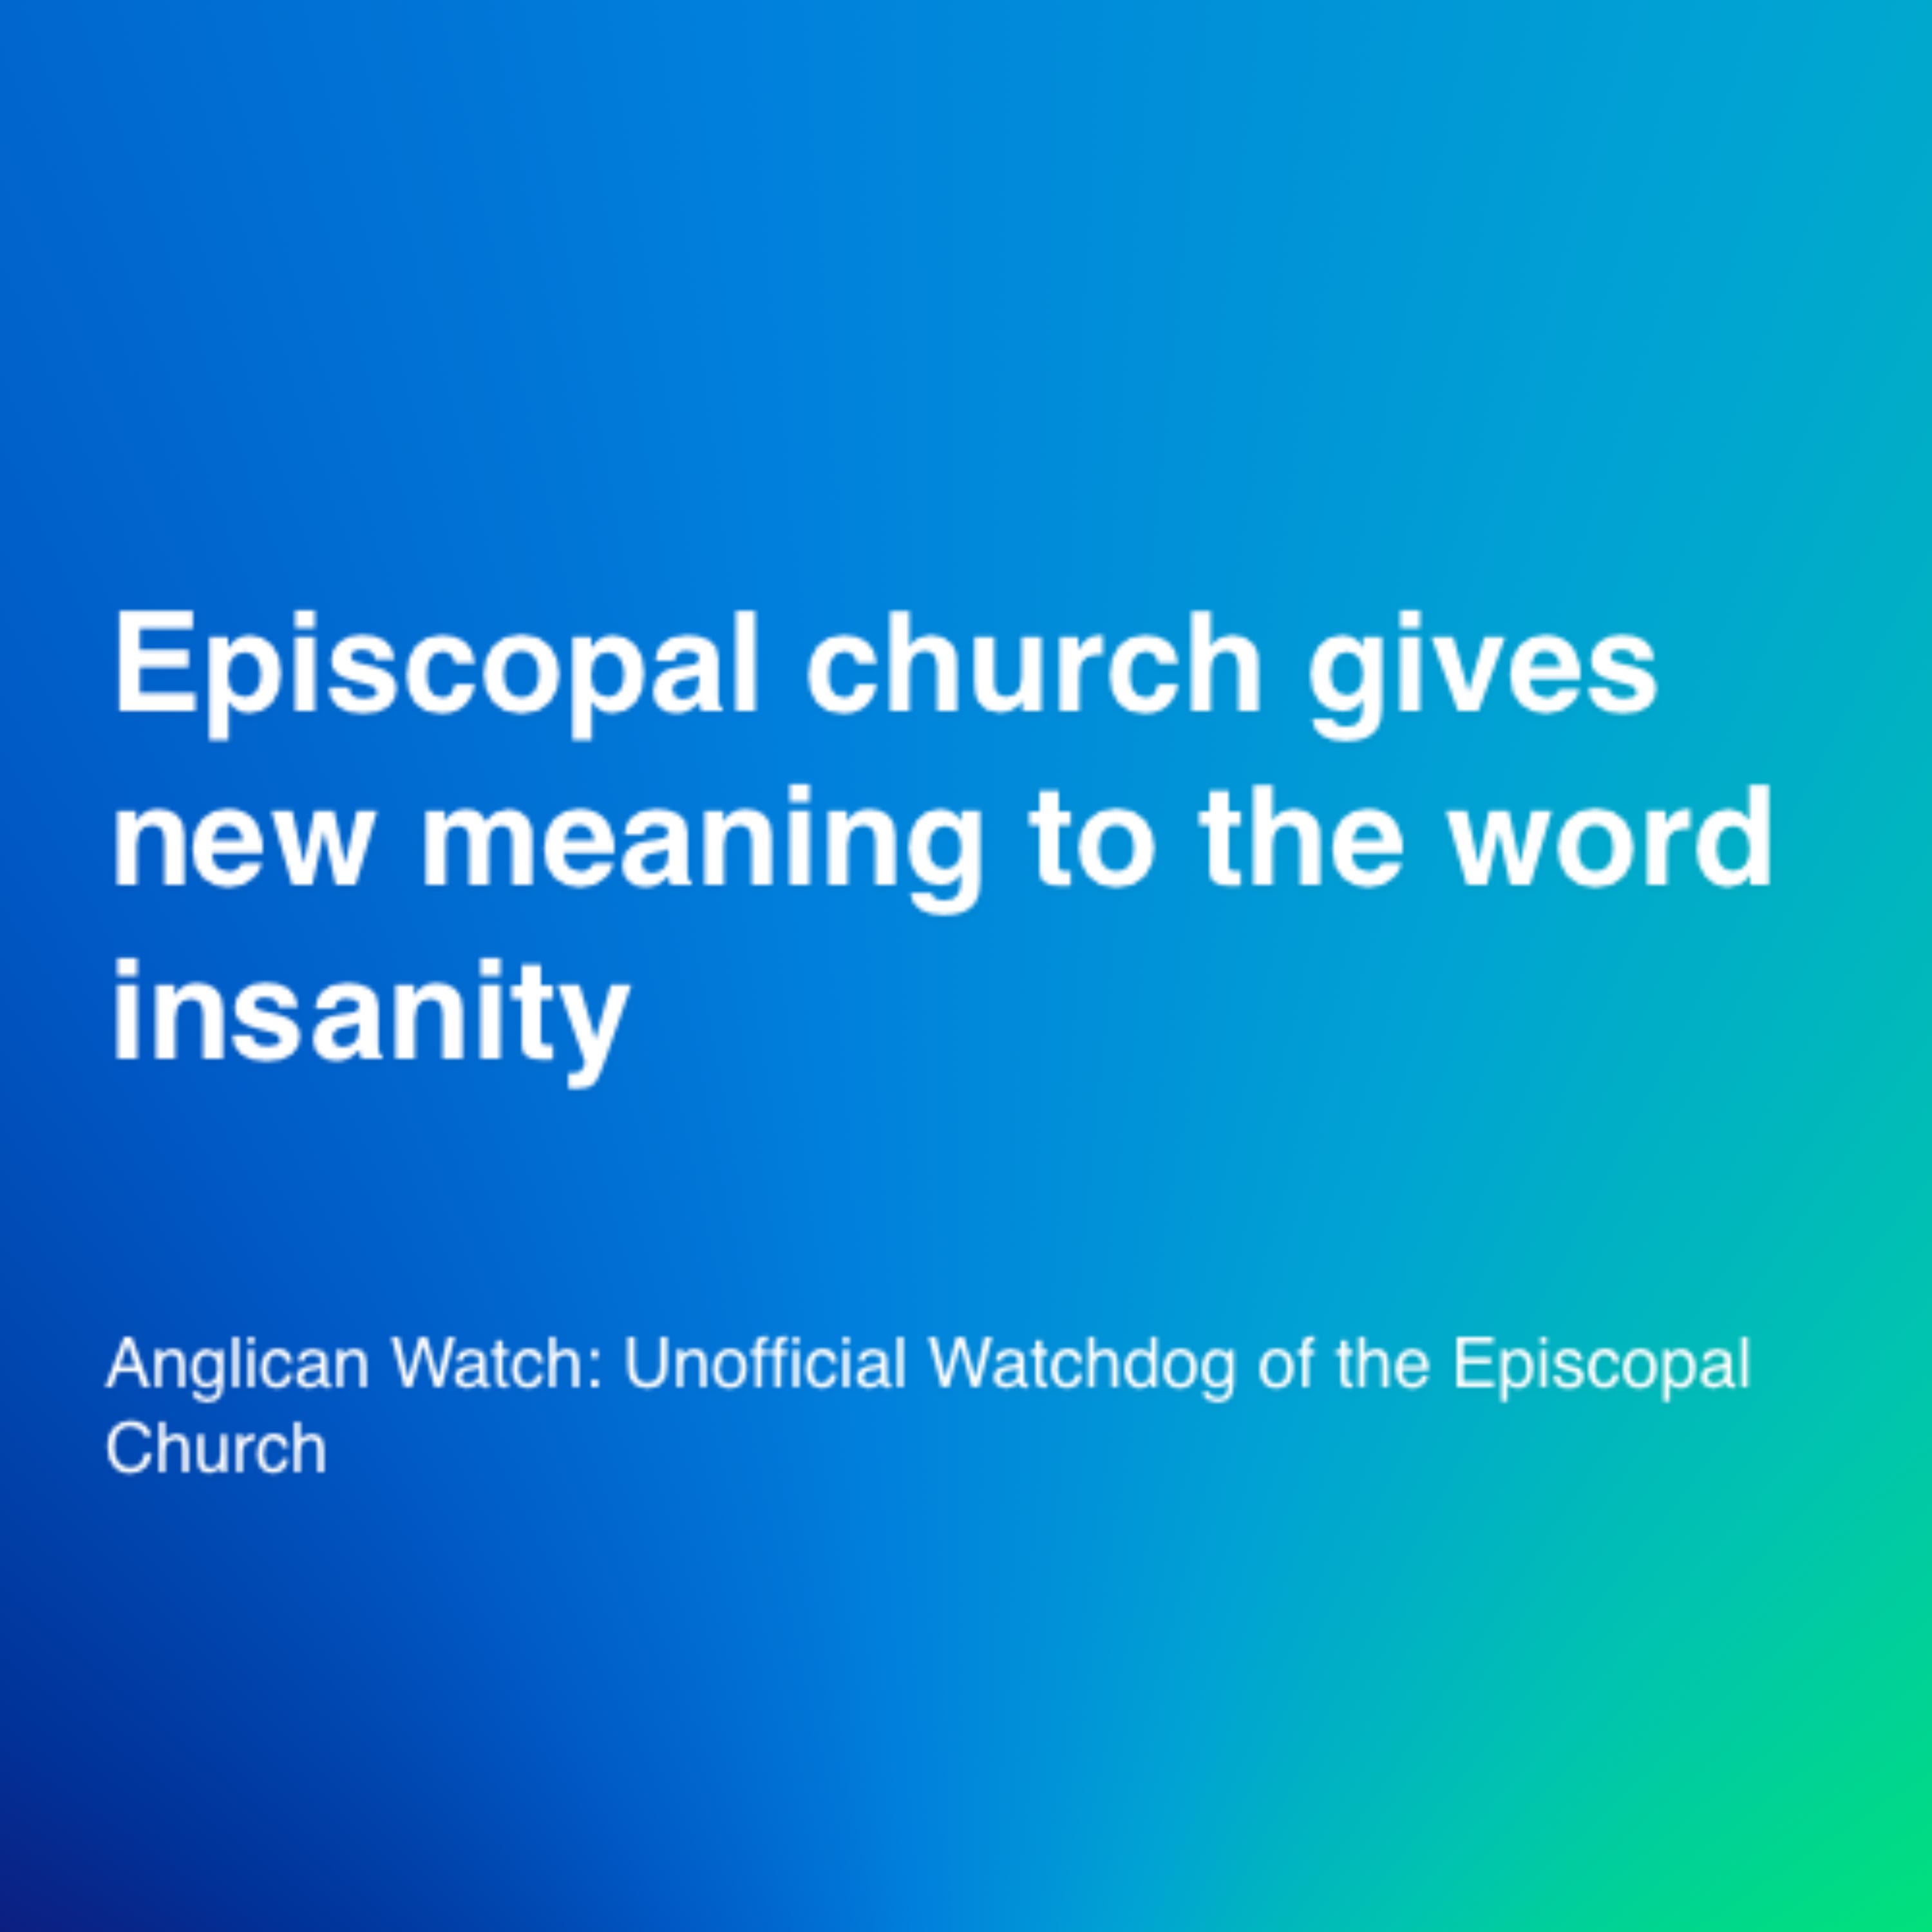 Episcopal church gives new meaning to the word insanity